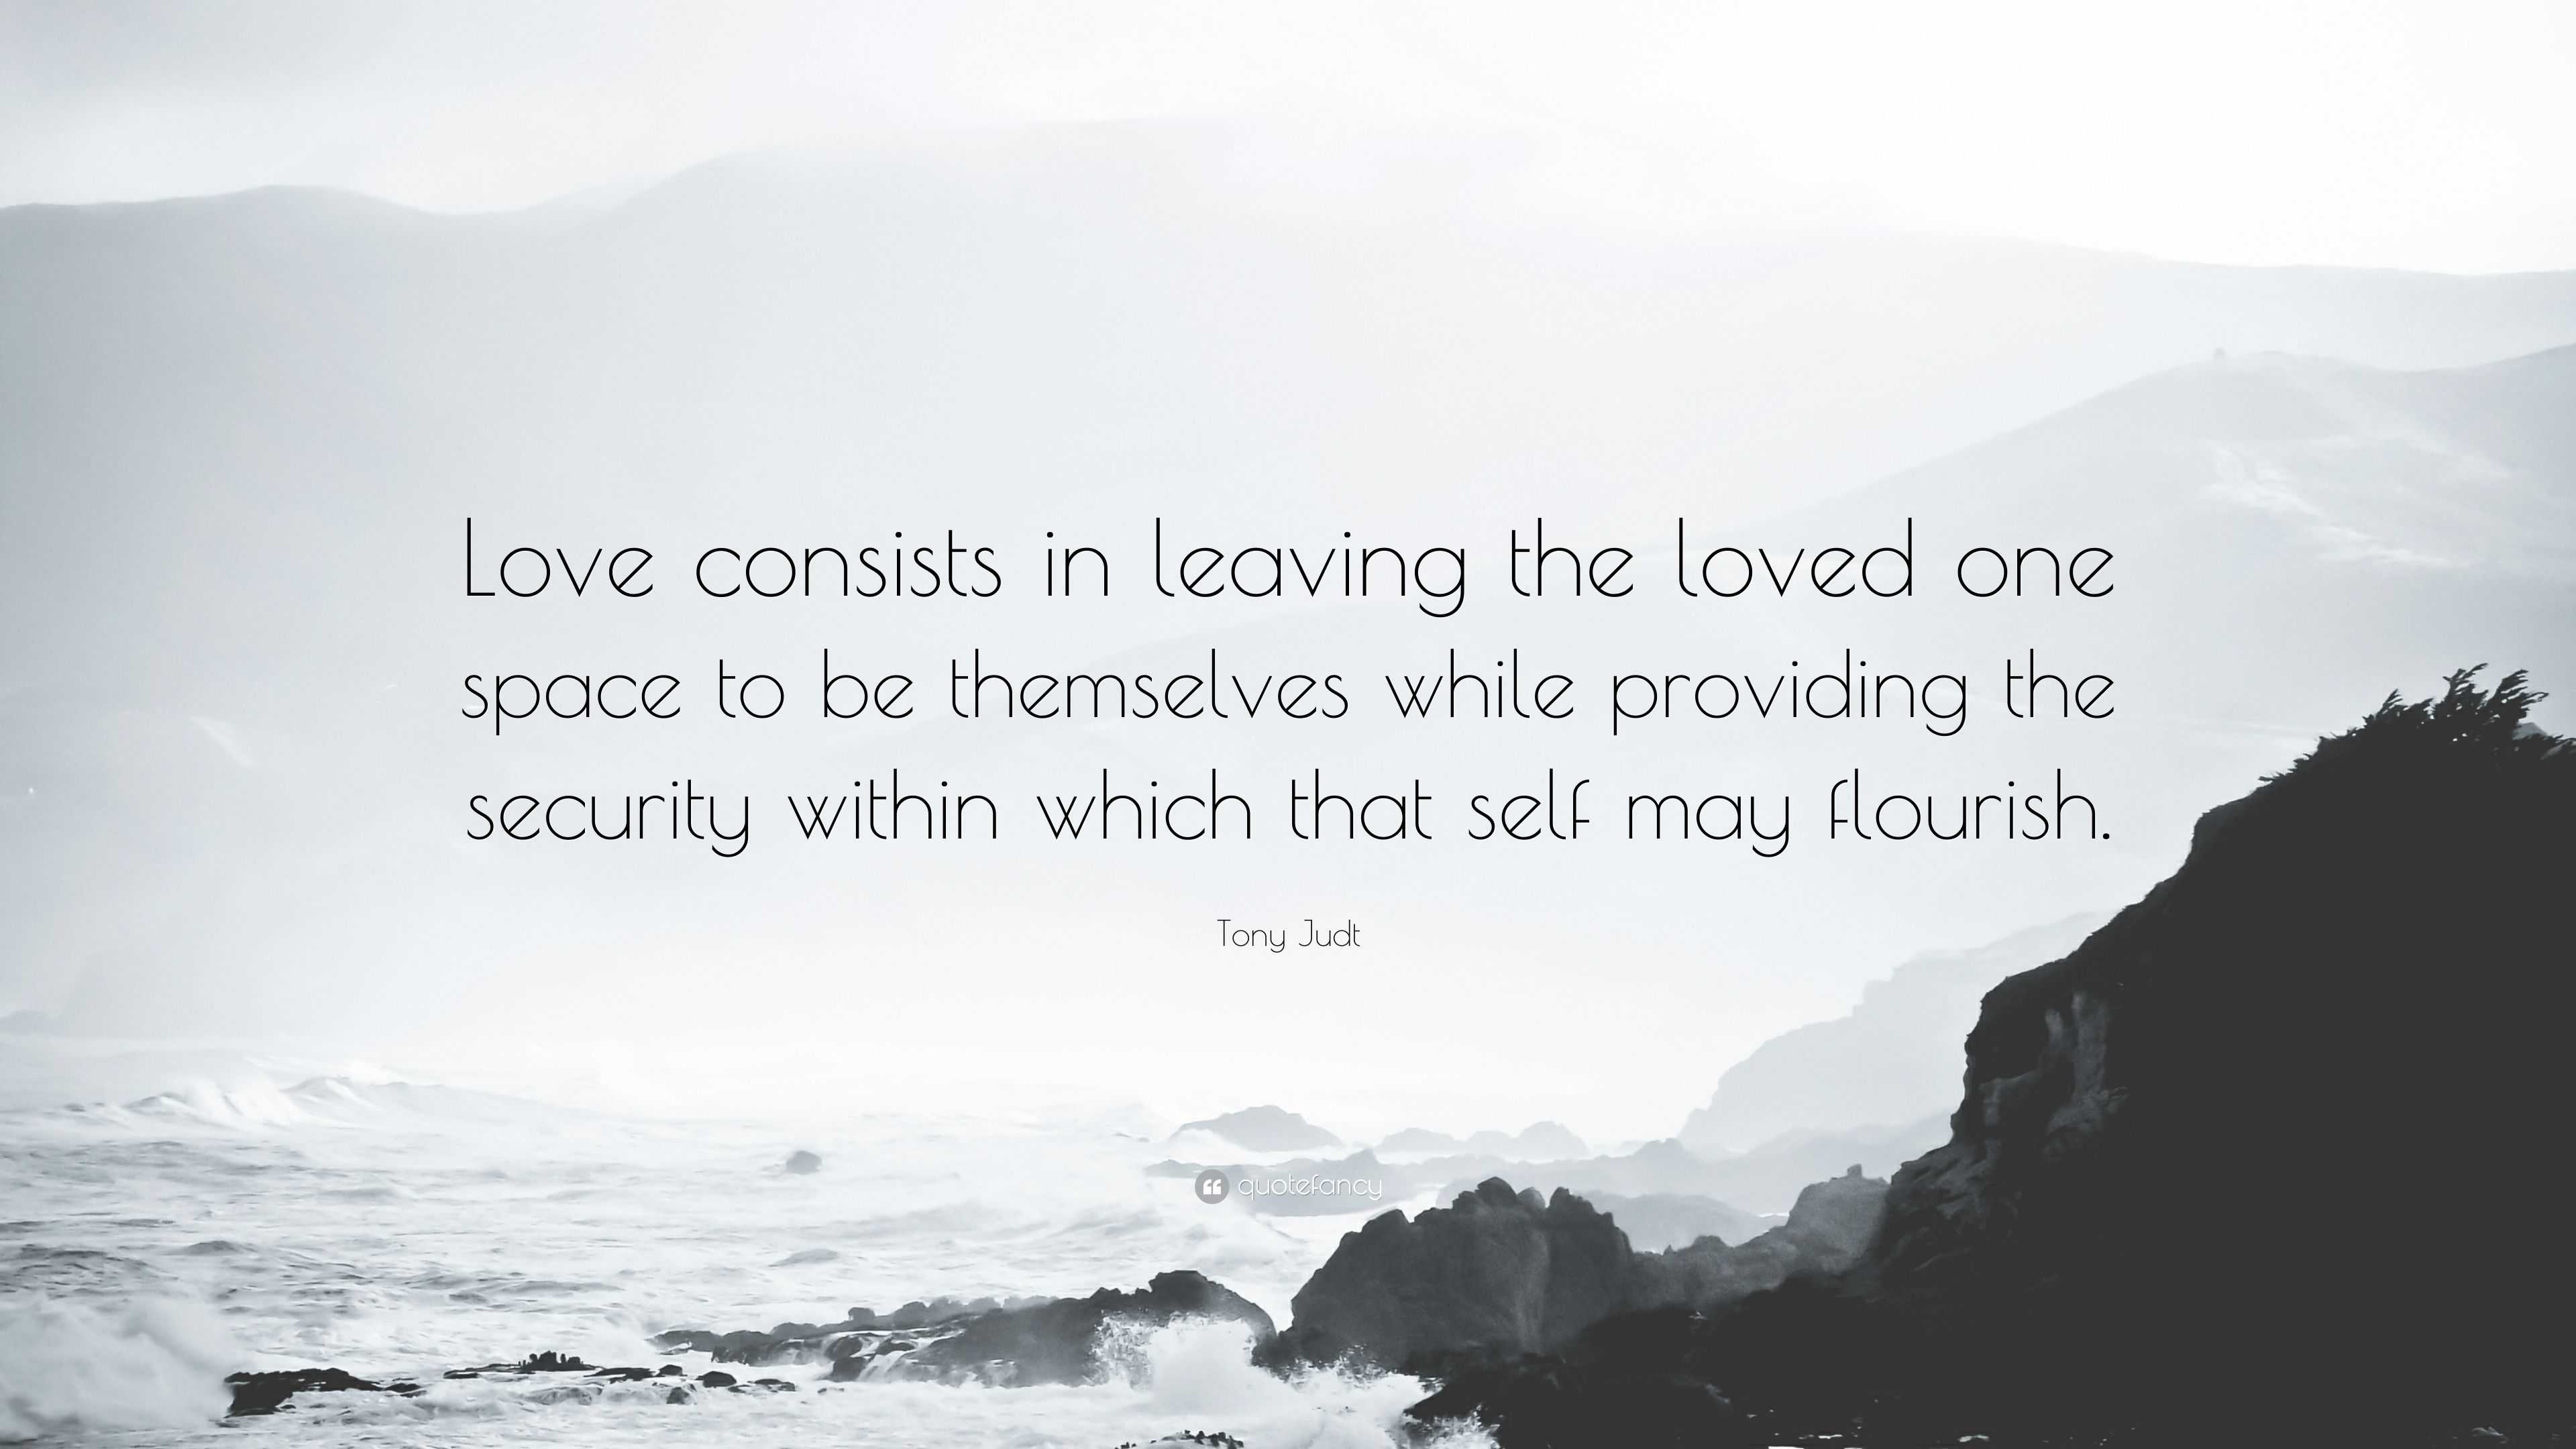 Tony Judt Quote “Love consists in leaving the loved one space to be themselves